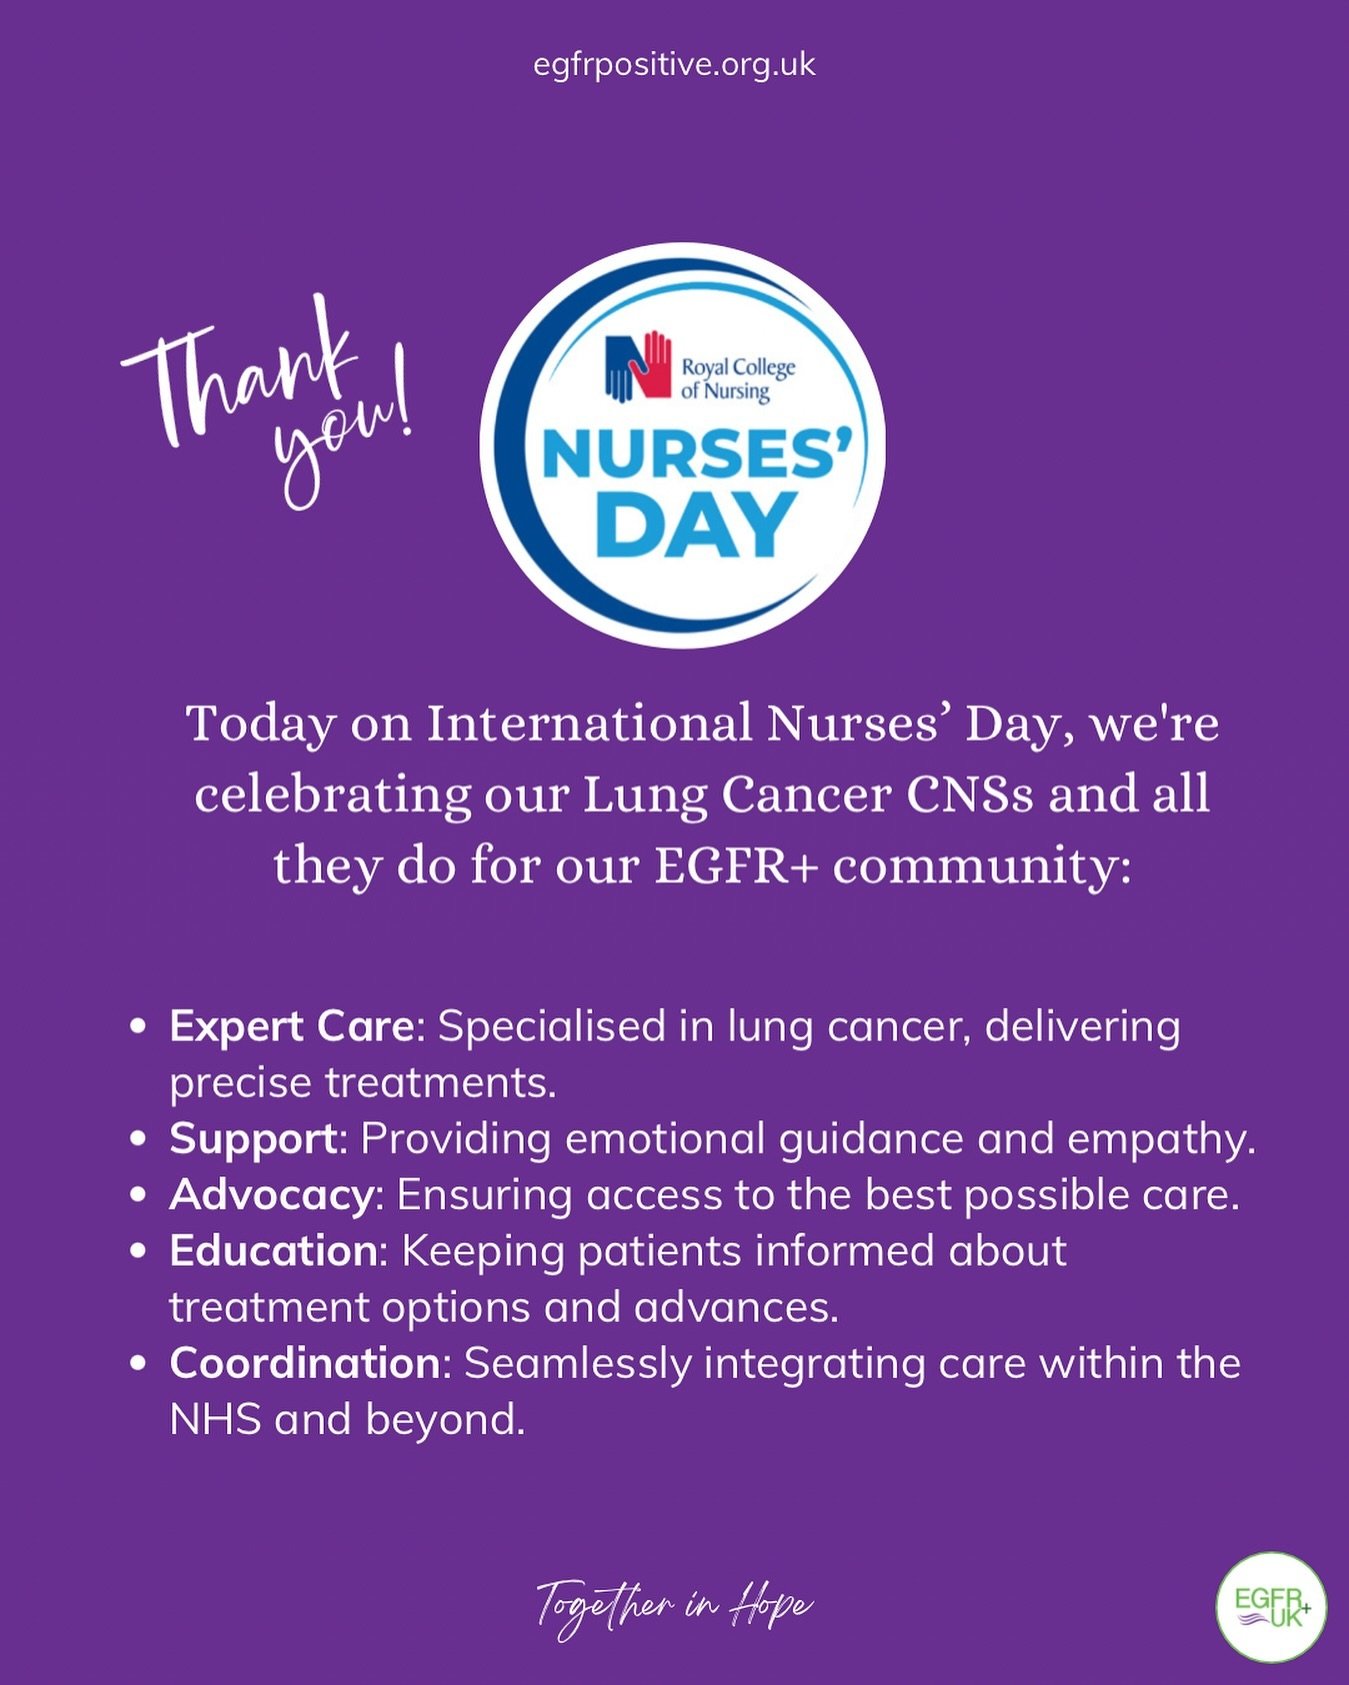 Today is International Nurses&rsquo; Day, and we want to give a special thanks to all the lung cancer CNSs who support our EGFR+ community. 

Your role is complex and demanding, encompassing many different responsibilities &ndash; you really are amaz